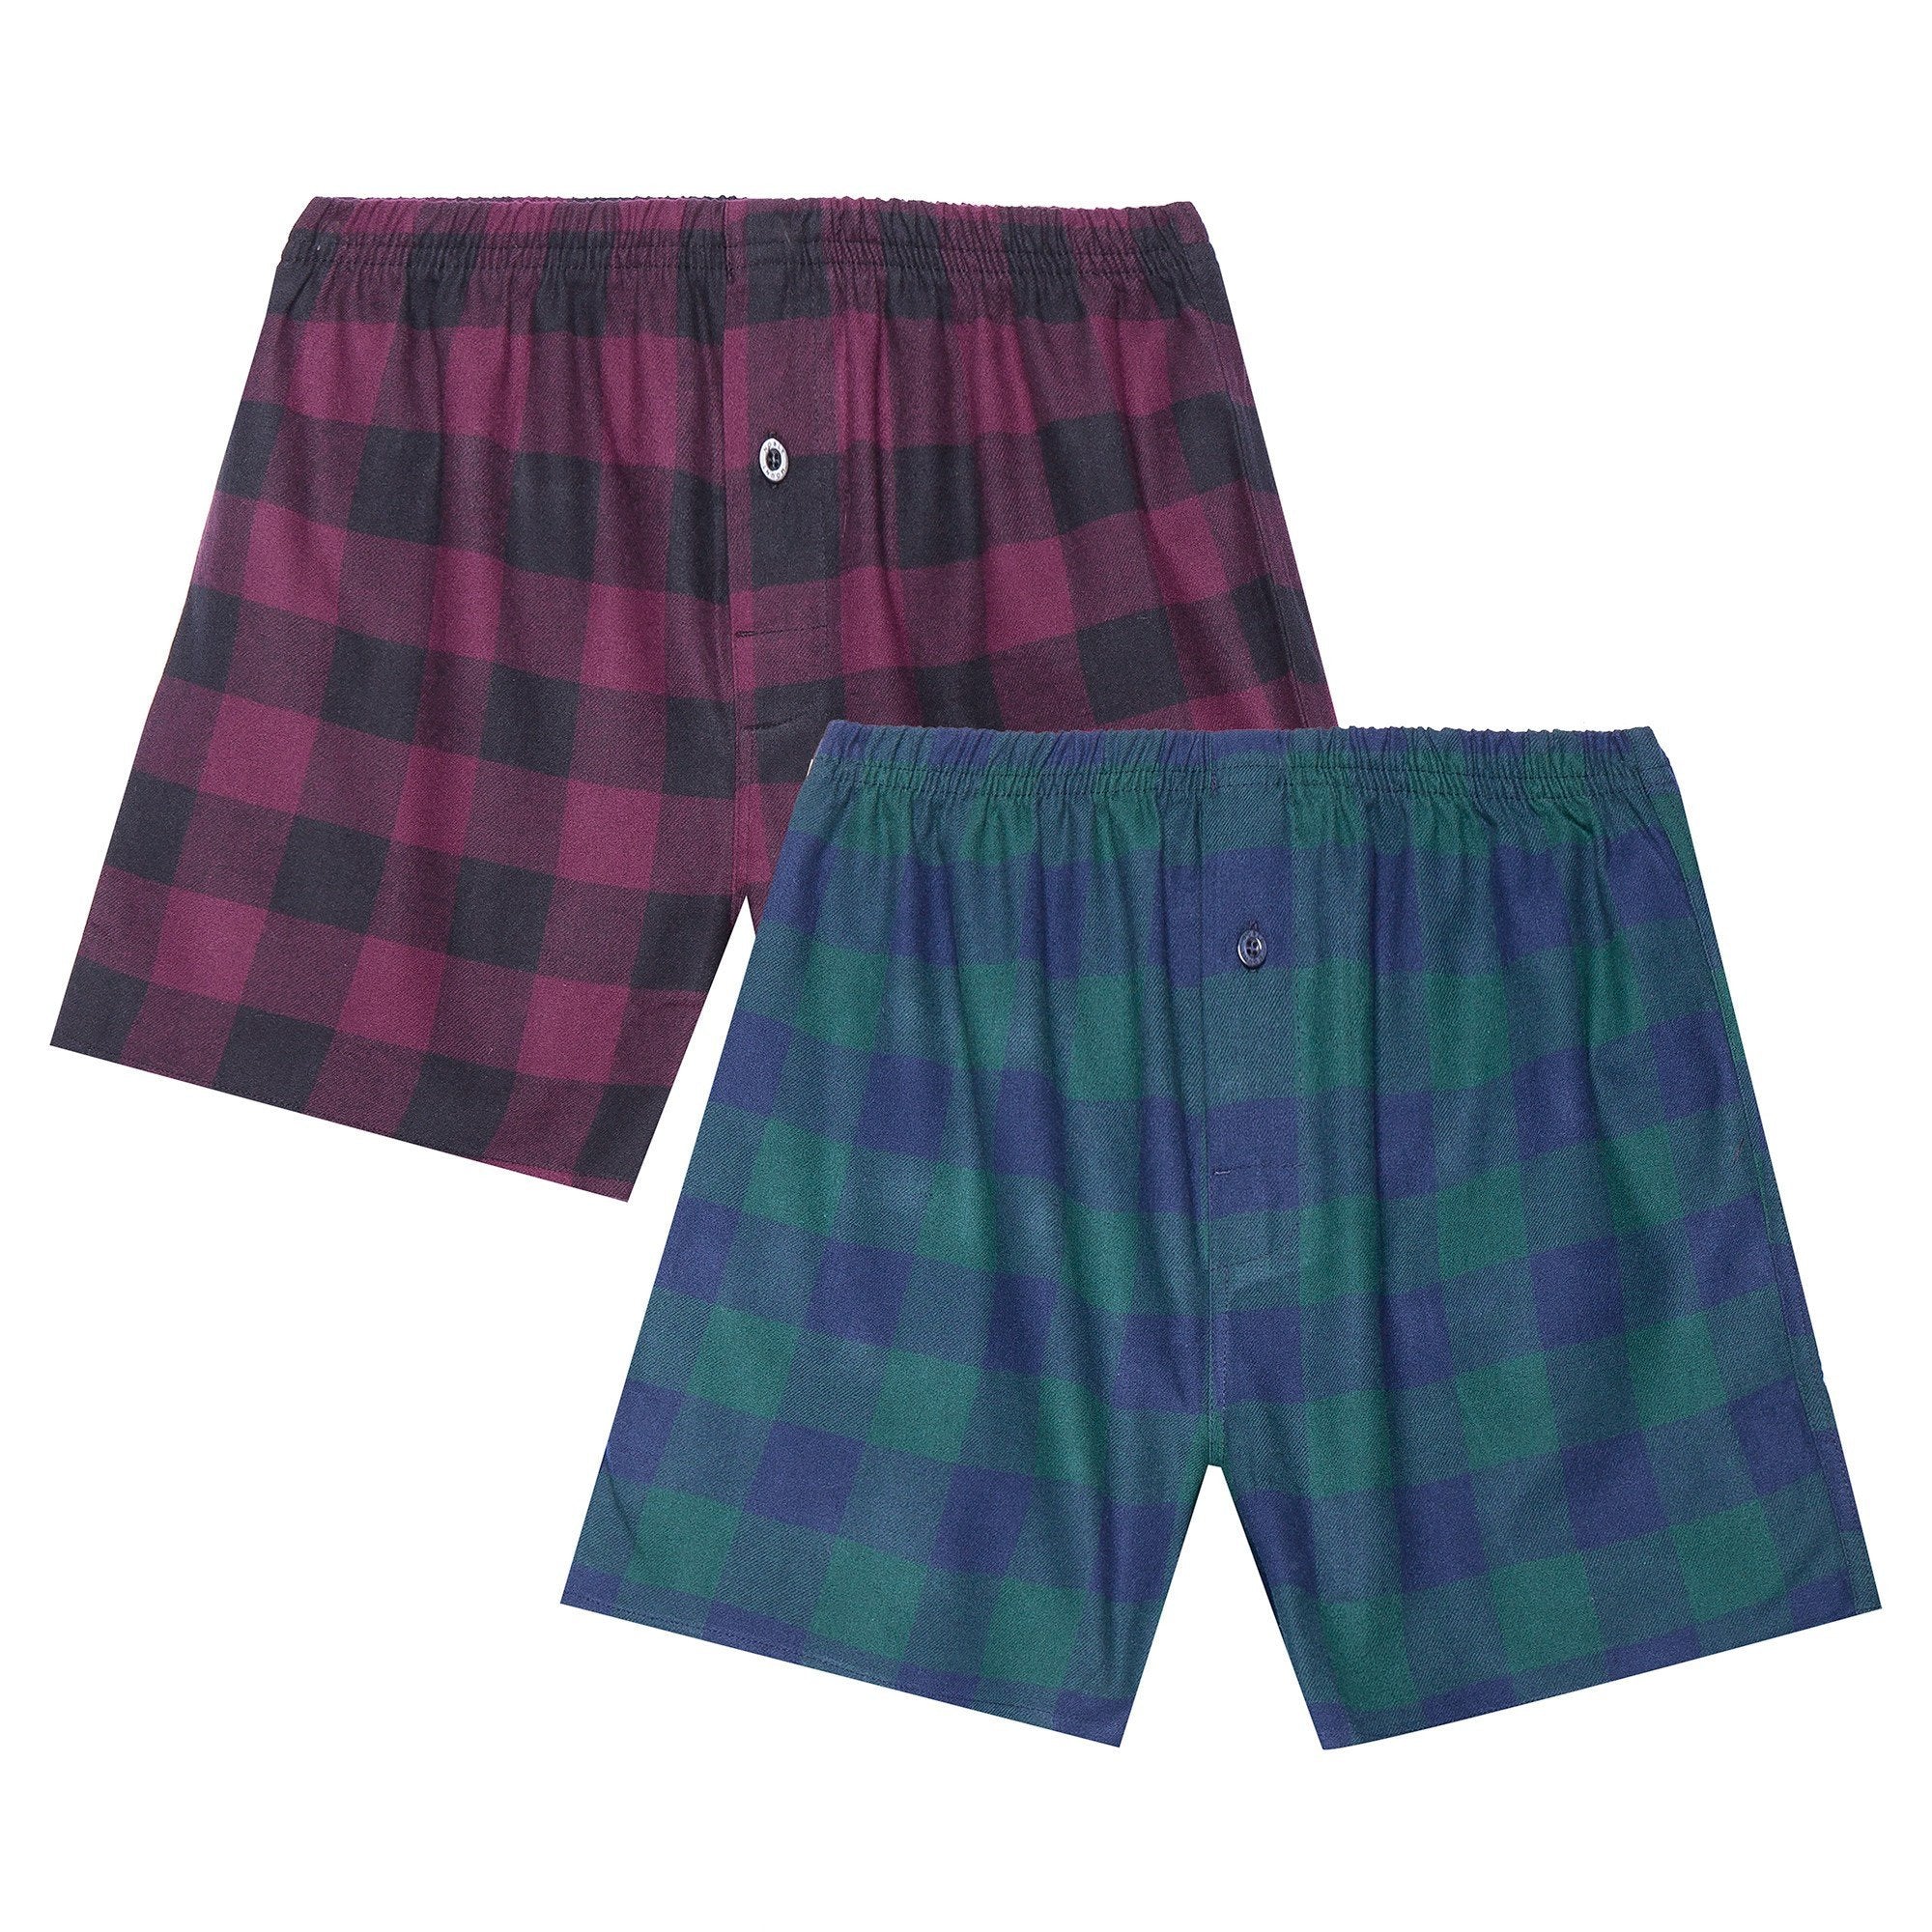 Men's 100% Cotton Flannel Boxers - 2 Pack - Gingham Fig/Green